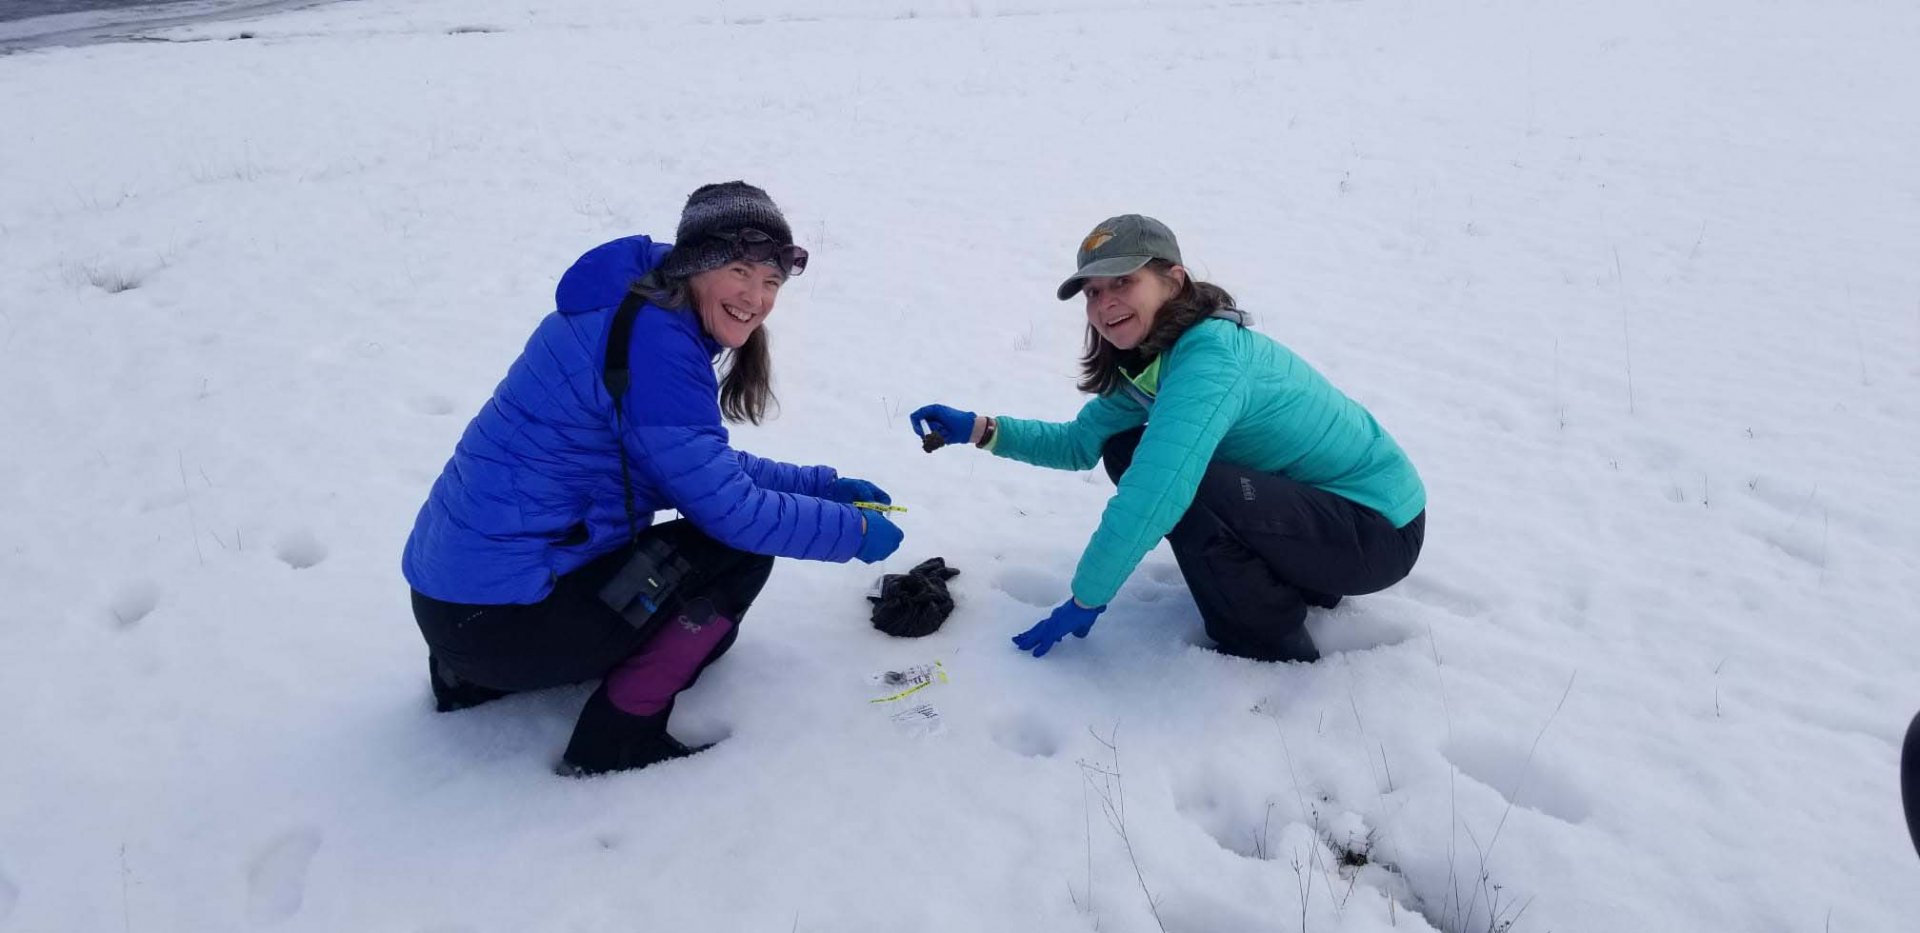 Teachers collecting bison scat in snow